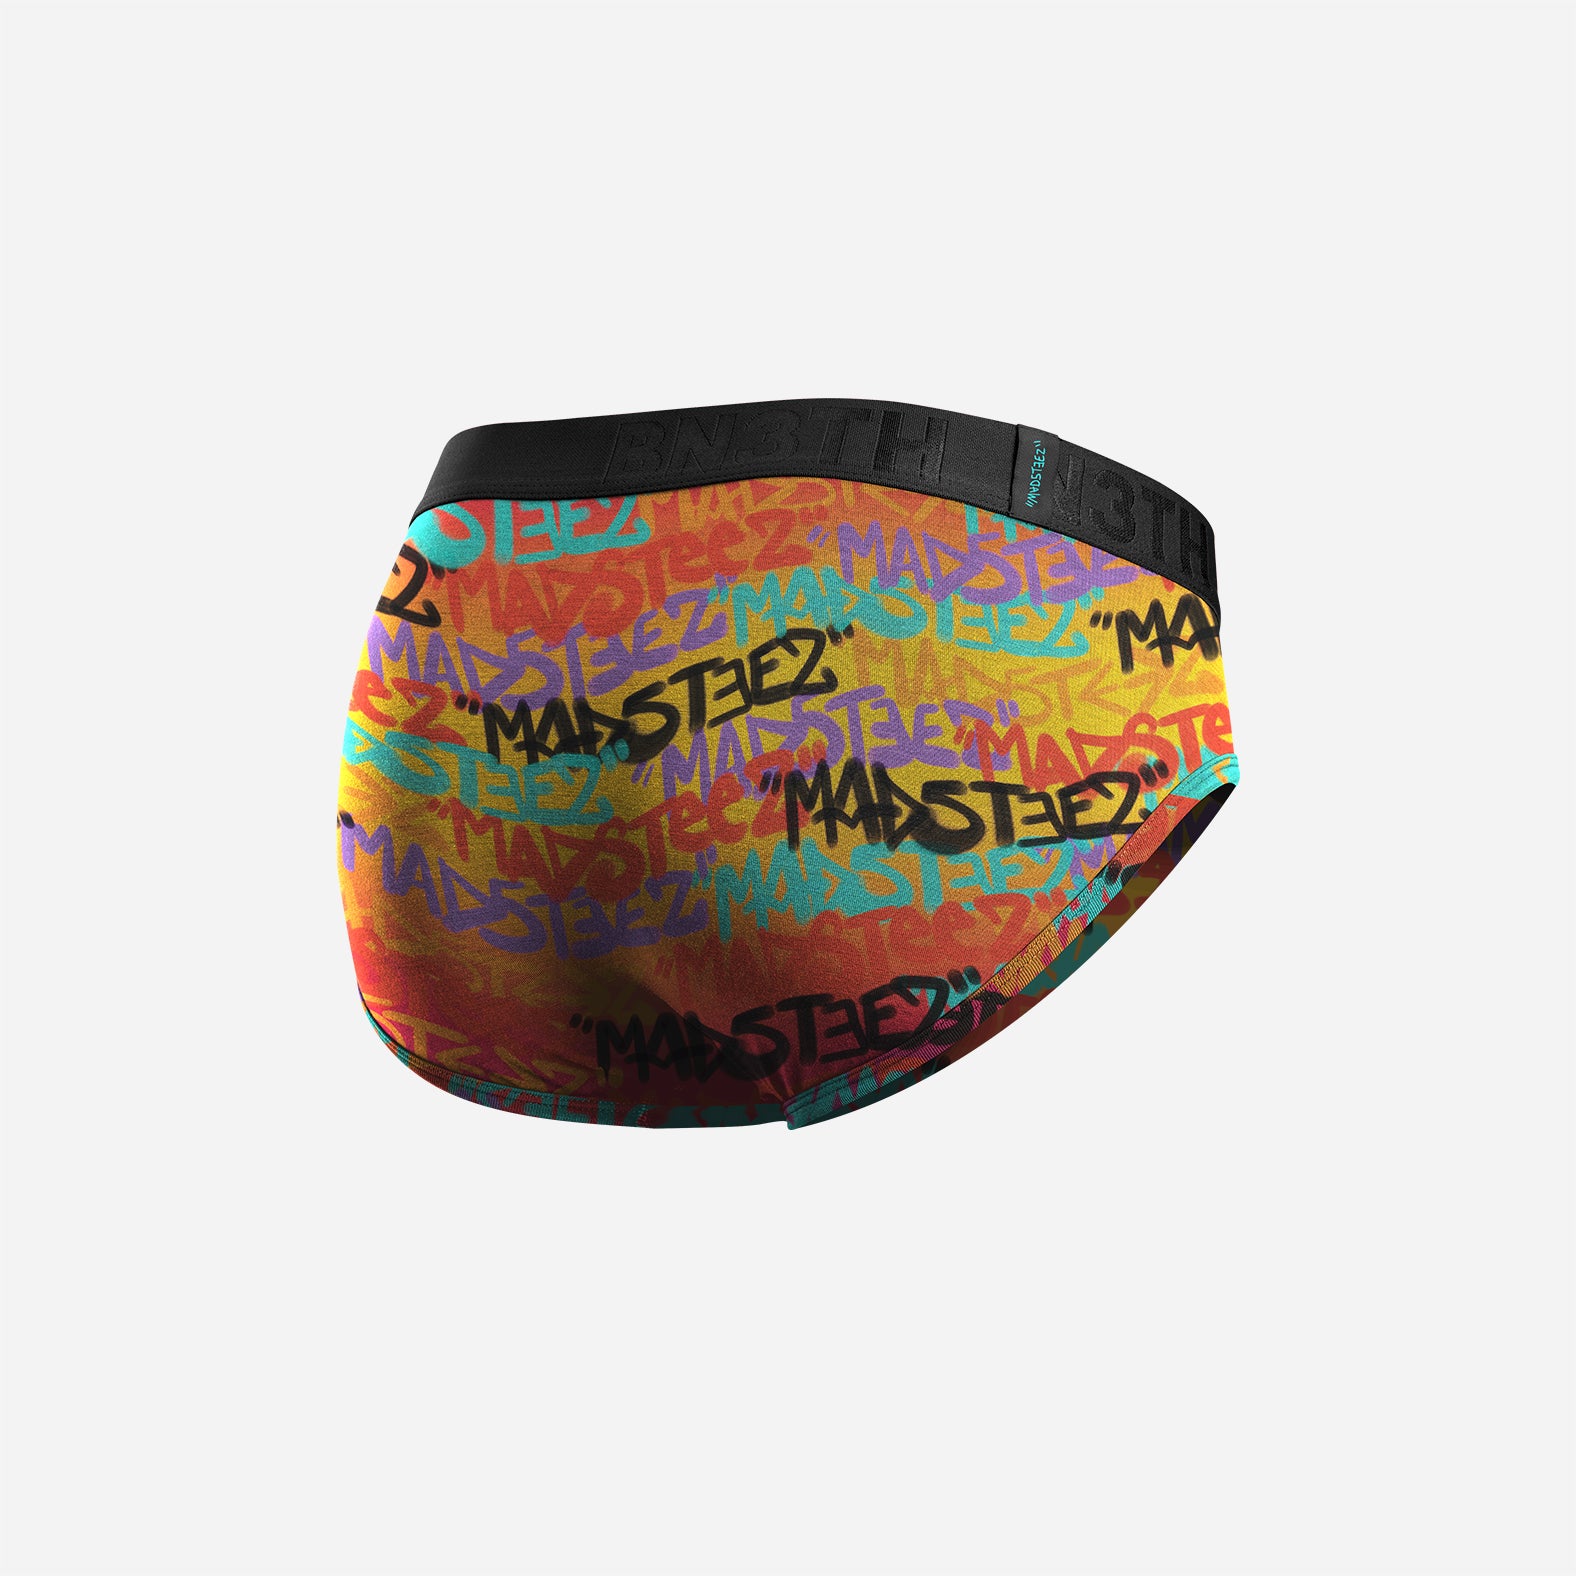 CLASSIC BRIEF WITH FLY: MADSTEEZ RAINBOW GRAFFITI BLACK